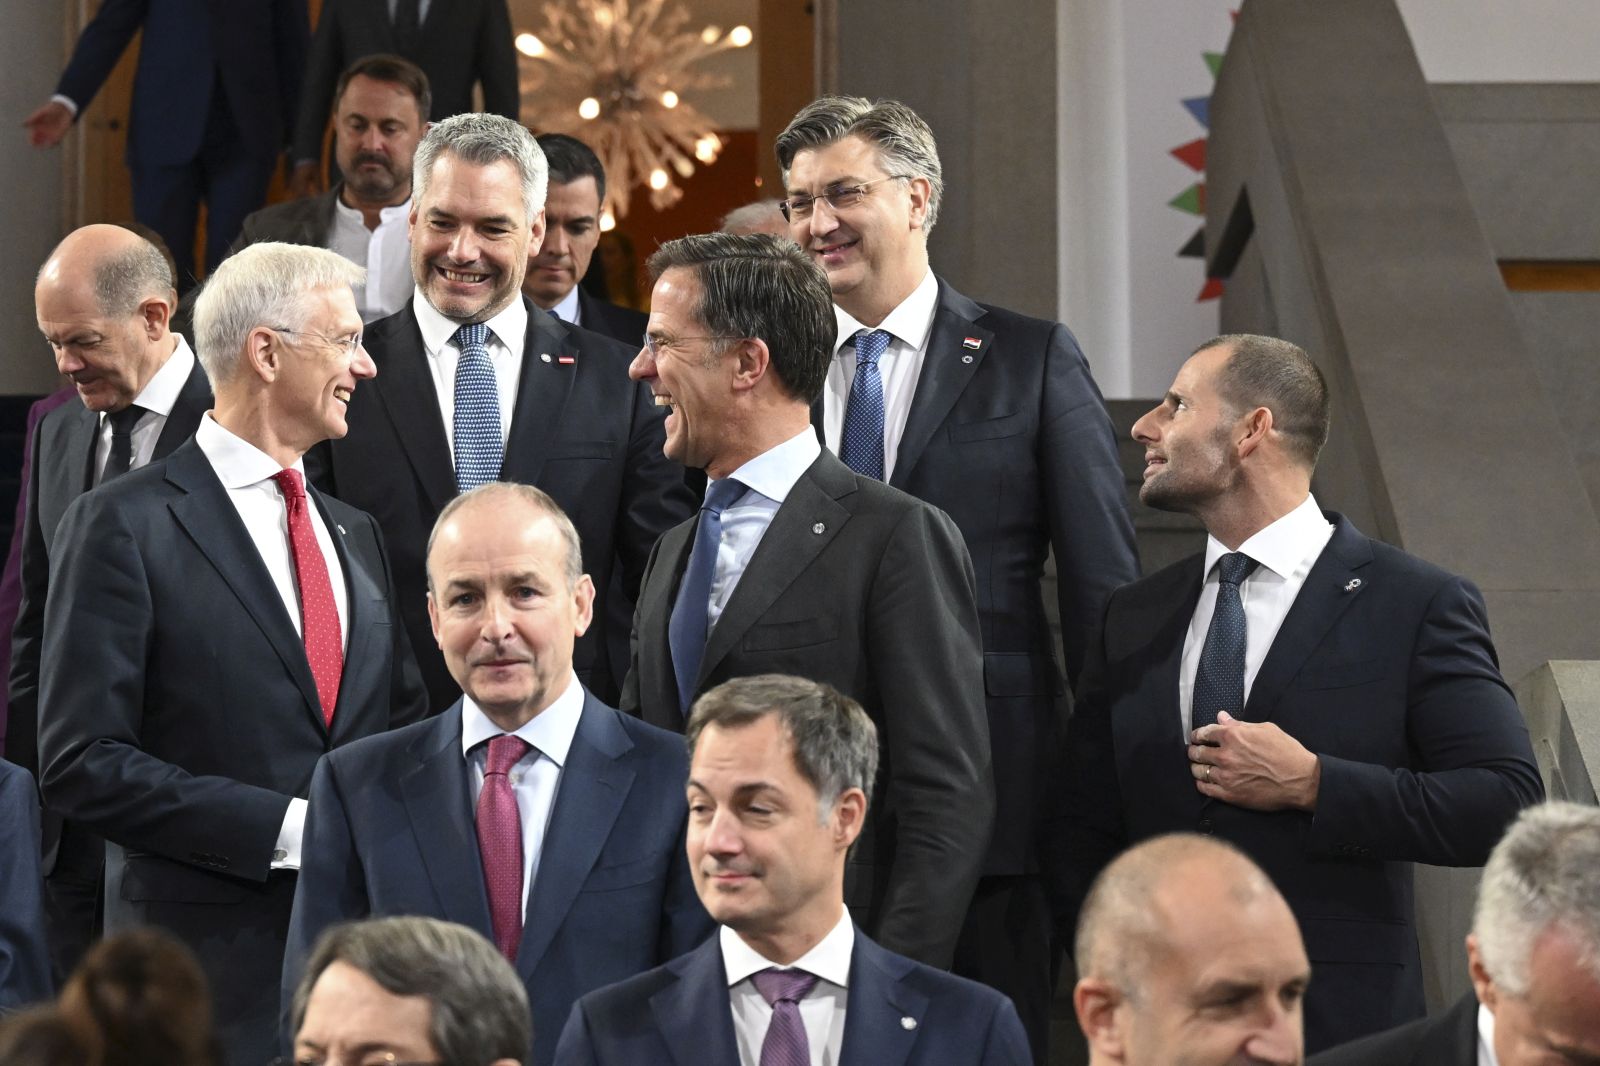 epa10228749 Latvian Prime Minister Krisjanis Karins (2-L) jokes with Austrian Chancellor Karl Nehammer (3-L), Dutch Prime Minister Mark Rutte (3-R) and Croatian Prime Minister Andrej Plenkovic (2-R) during an informal EU summit in Prague, Czech Republic, 07 October 2022. EU leaders will meet in the Czech capital to discuss pressing issues such as Russia's invasion of Ukraine and the block's energy and economic situation.  EPA/FILIP SINGER